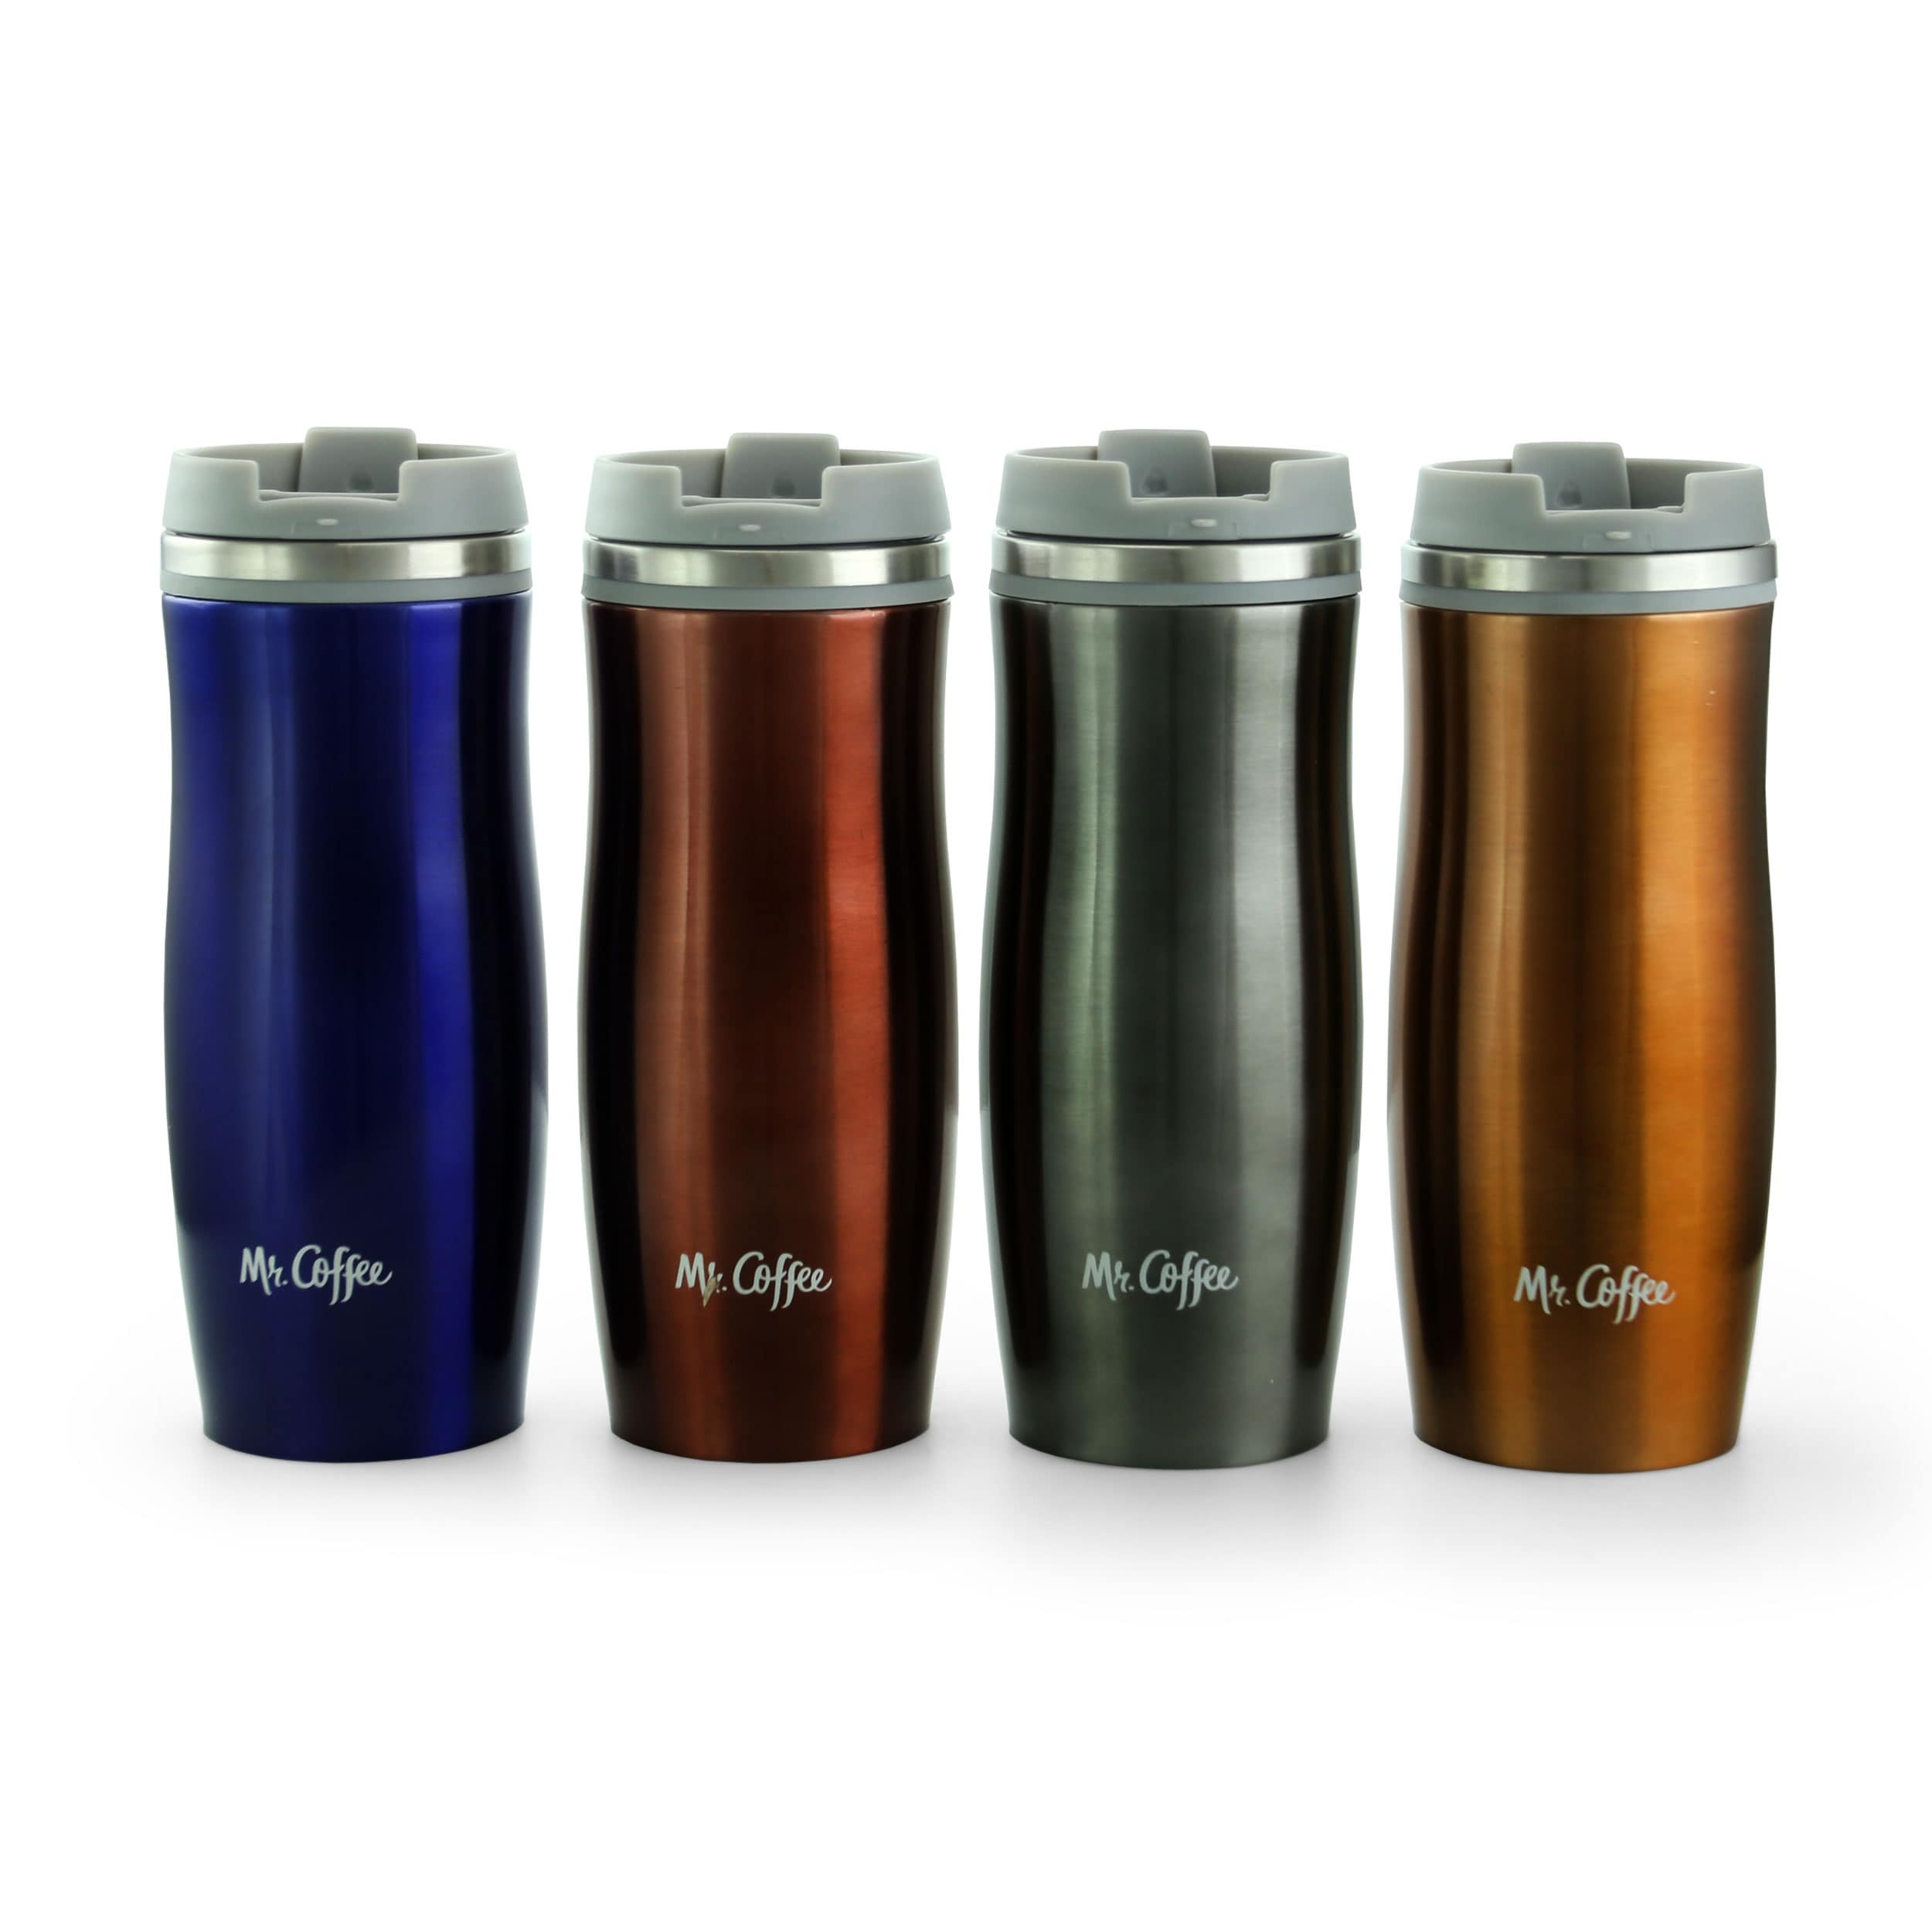 Mr. Coffee Kendrick 4 pc S/S 10 oz Thermal Travel Tumbler Cup Set - On Sale  - Bed Bath & Beyond - 32056822